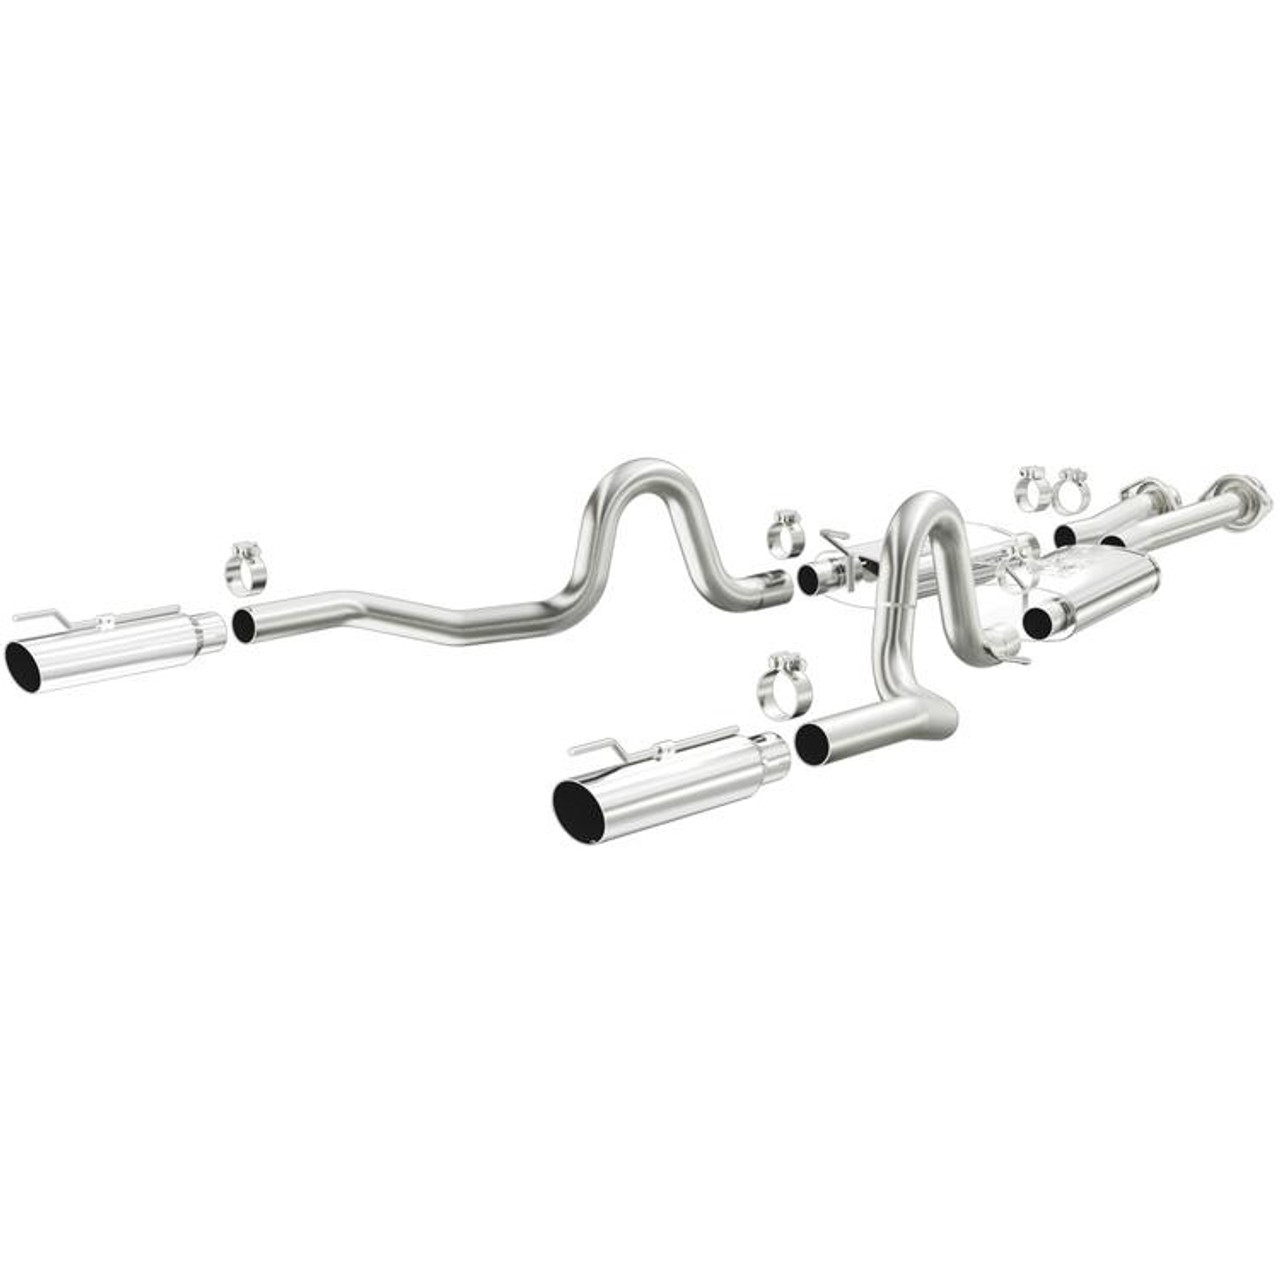 MagnaFlow 15671 Catback Exhaust Kit Stainless Steel w/ 3.5" Tips Mustang GT 1999-2004